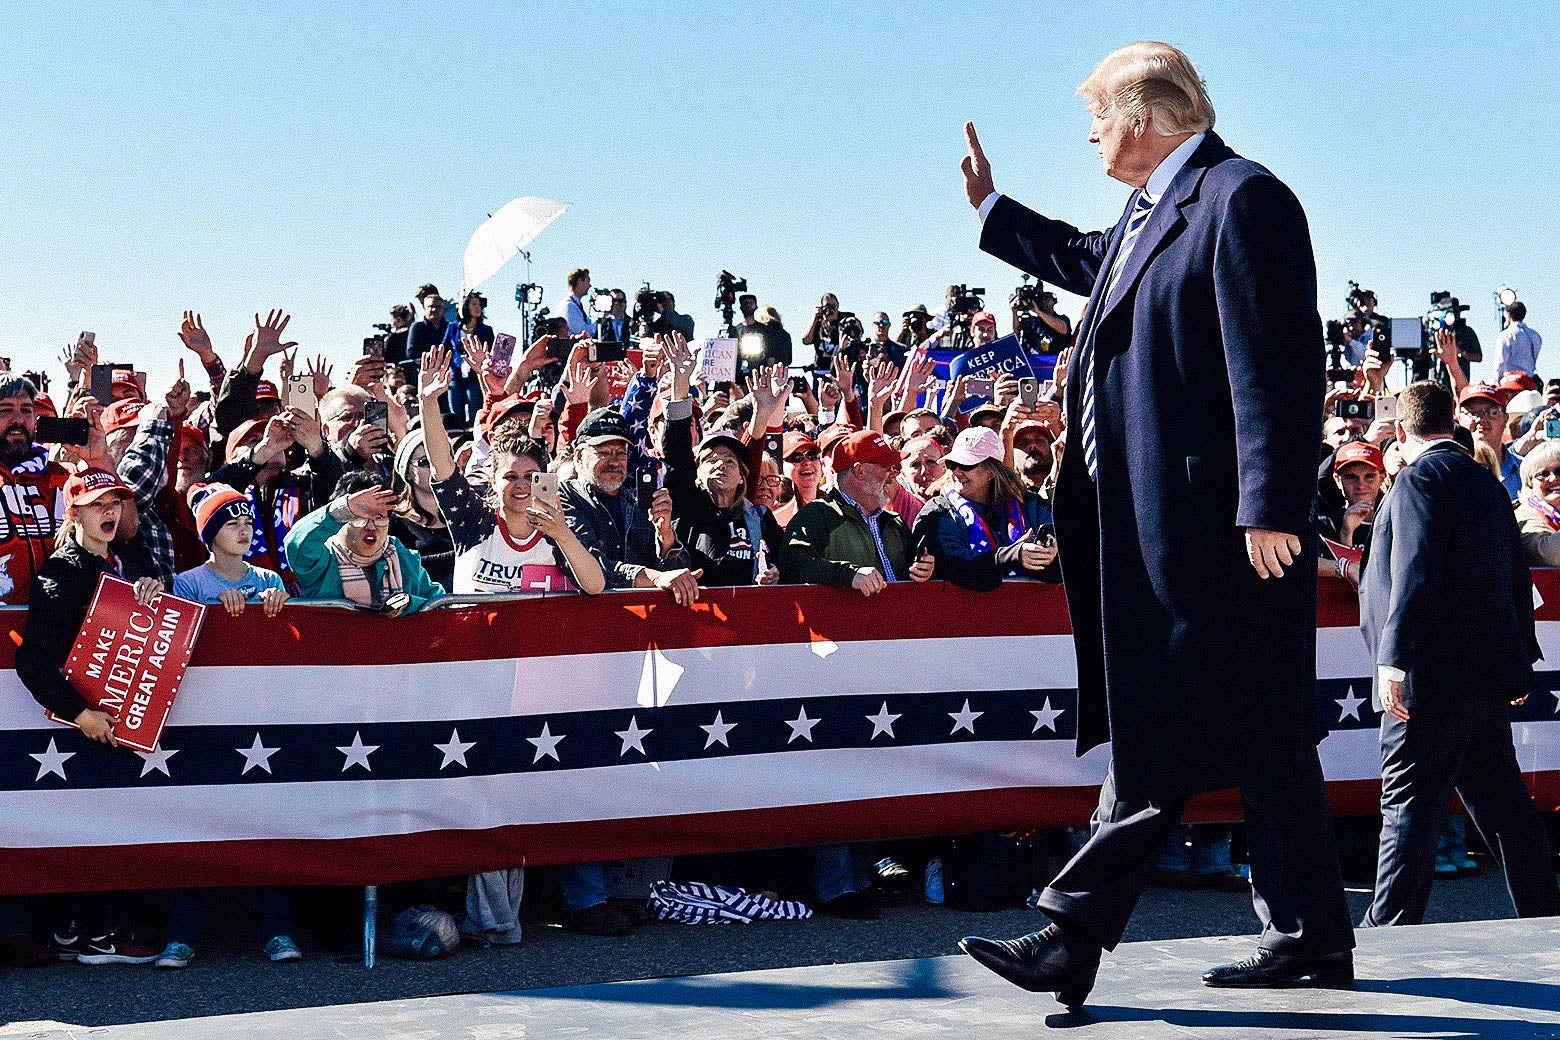 President Donald Trump arrives for a Make America Great Again rally in Elko, Nevada on Saturday.